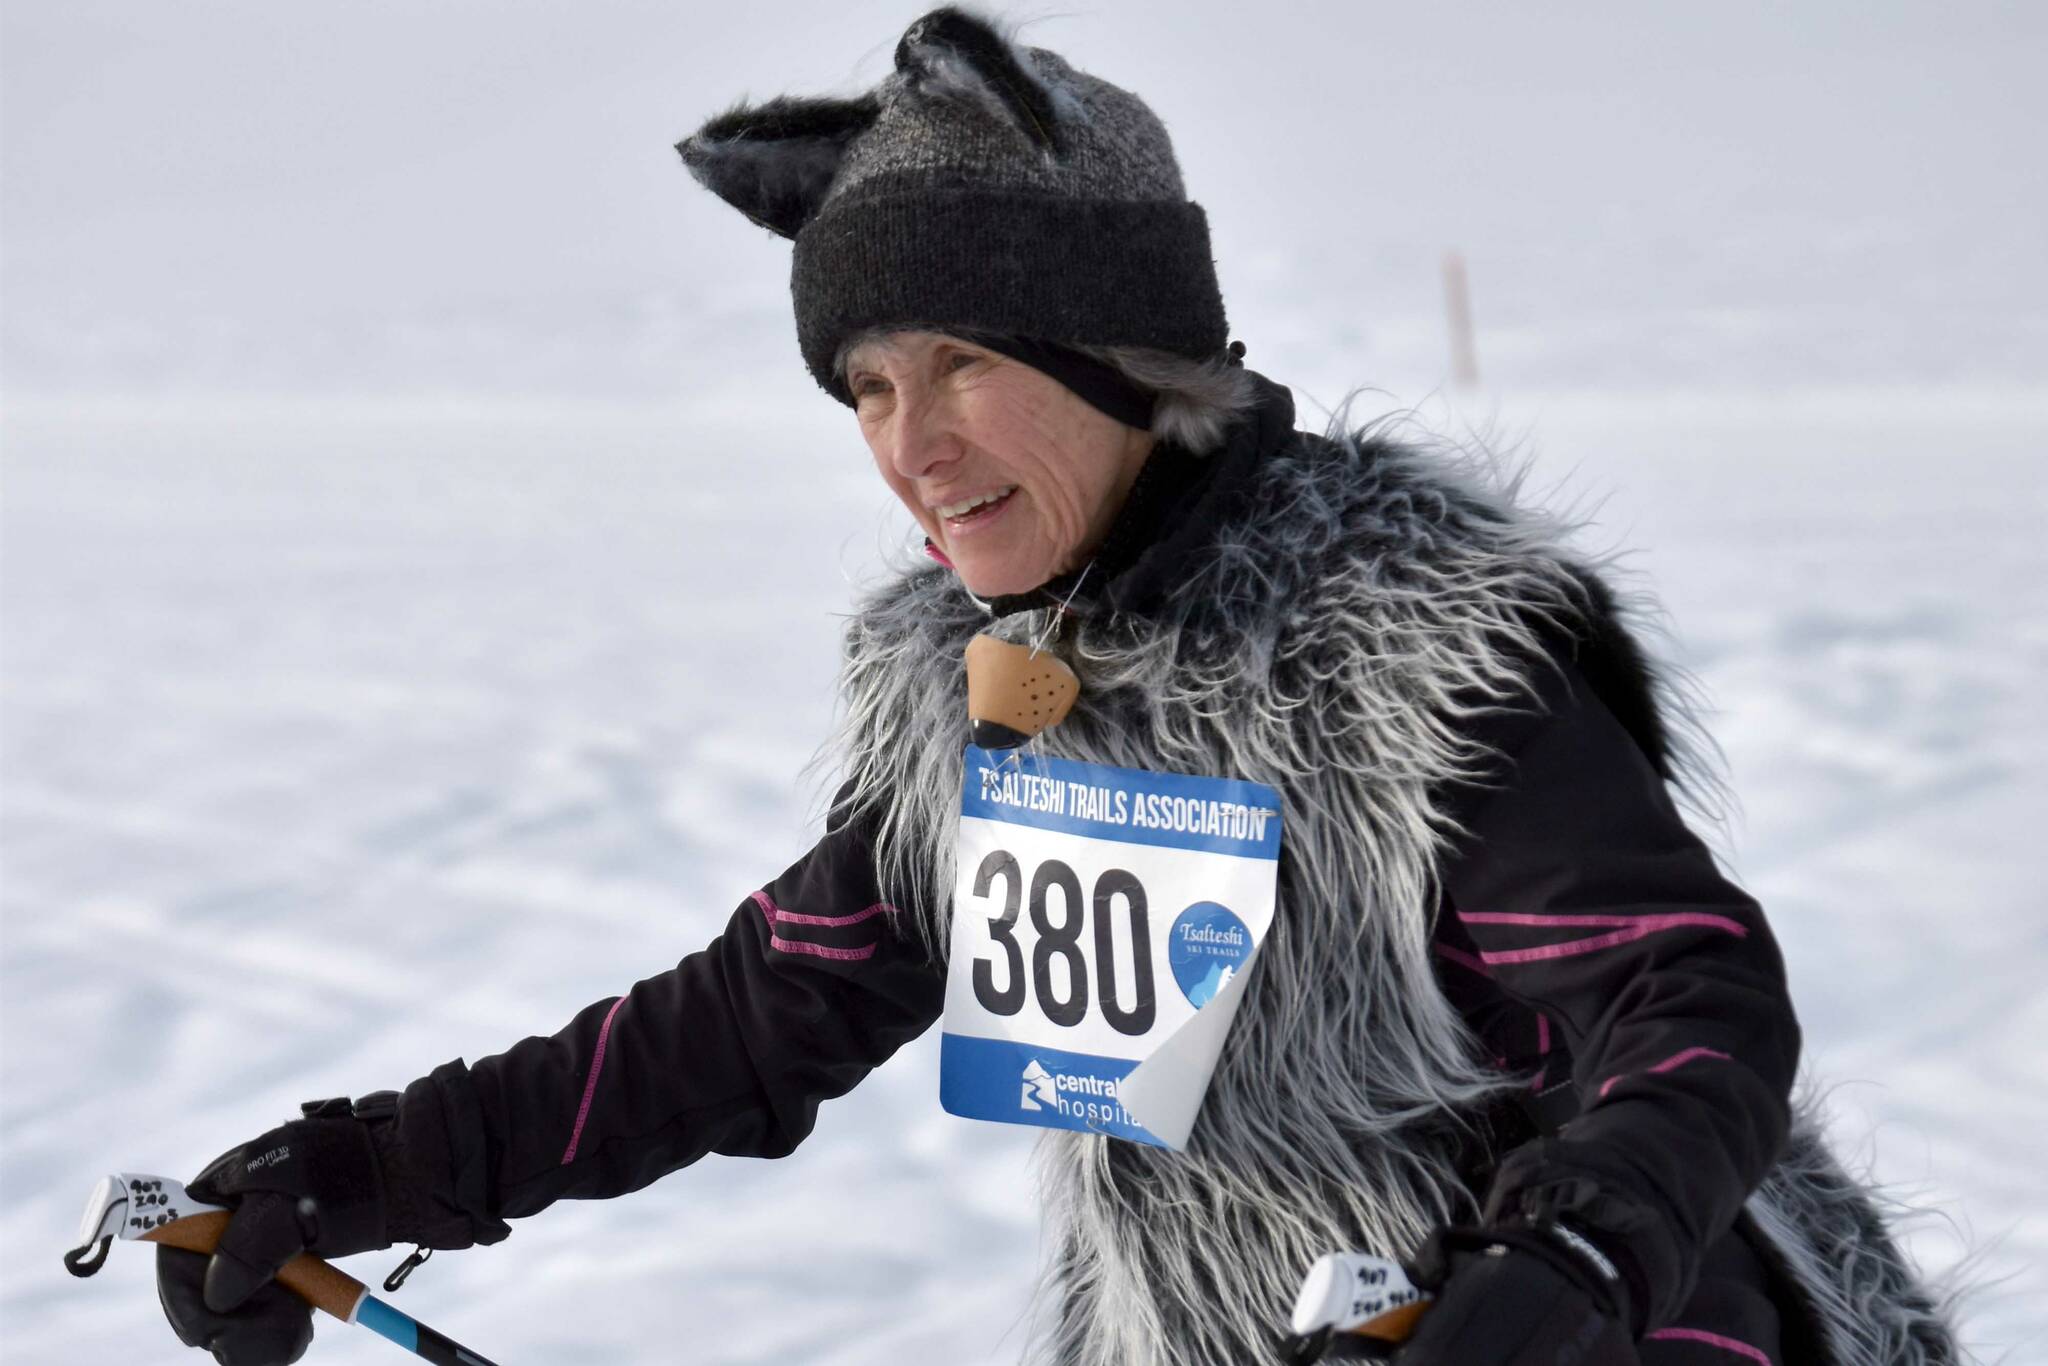 Sara Mahood, dressed as the Wolf, skis at the 19th annual Ski For Women on Sunday, Feb. 12, 2023, at Tsalteshi Trails just outside of Soldotna, Alaska. Mahood was part of the winning costume of "Little Red Riding Hood and the Big Bad Wolf." Not pictured, Leslie Boyd was Little Red Riding Hood, Sue Seggerman was the Woodcutter and Gigi Banas was Grandma. (Photo by Jeff Helminiak/Peninsula Clarion)